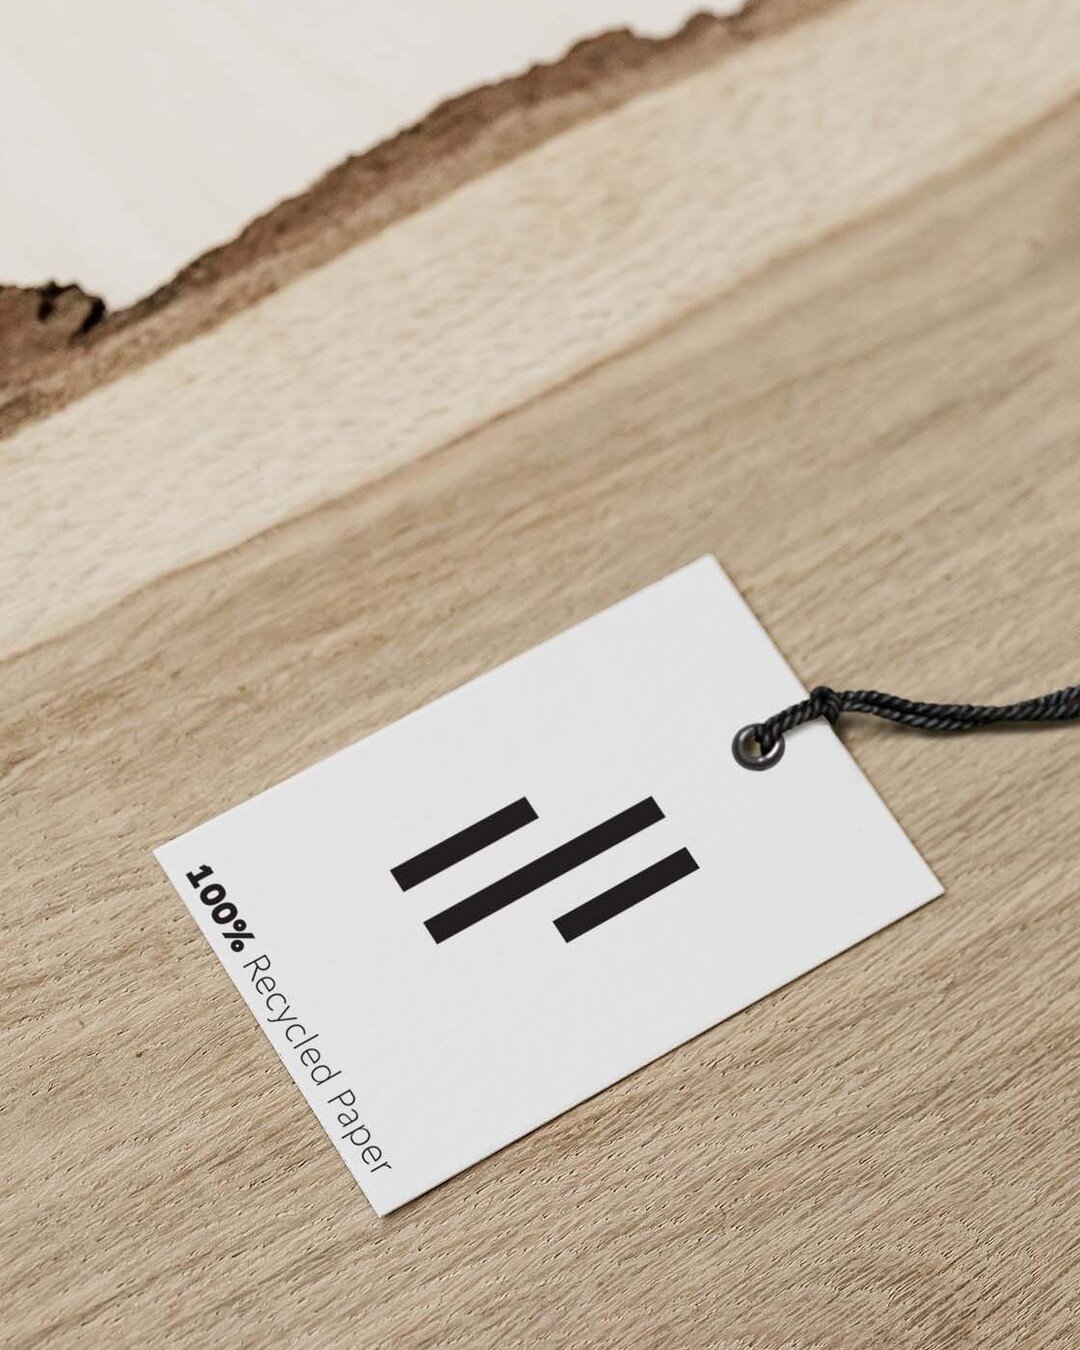 The push toward more sustainable product solutions is paramount and has come to stay. Our hangtags are all available in recycled paper and with FSC certifications.

.
.
.

 #packaging #hangtag #hangtags #recycledpaper #ecofashion #ecofriendly #sustai